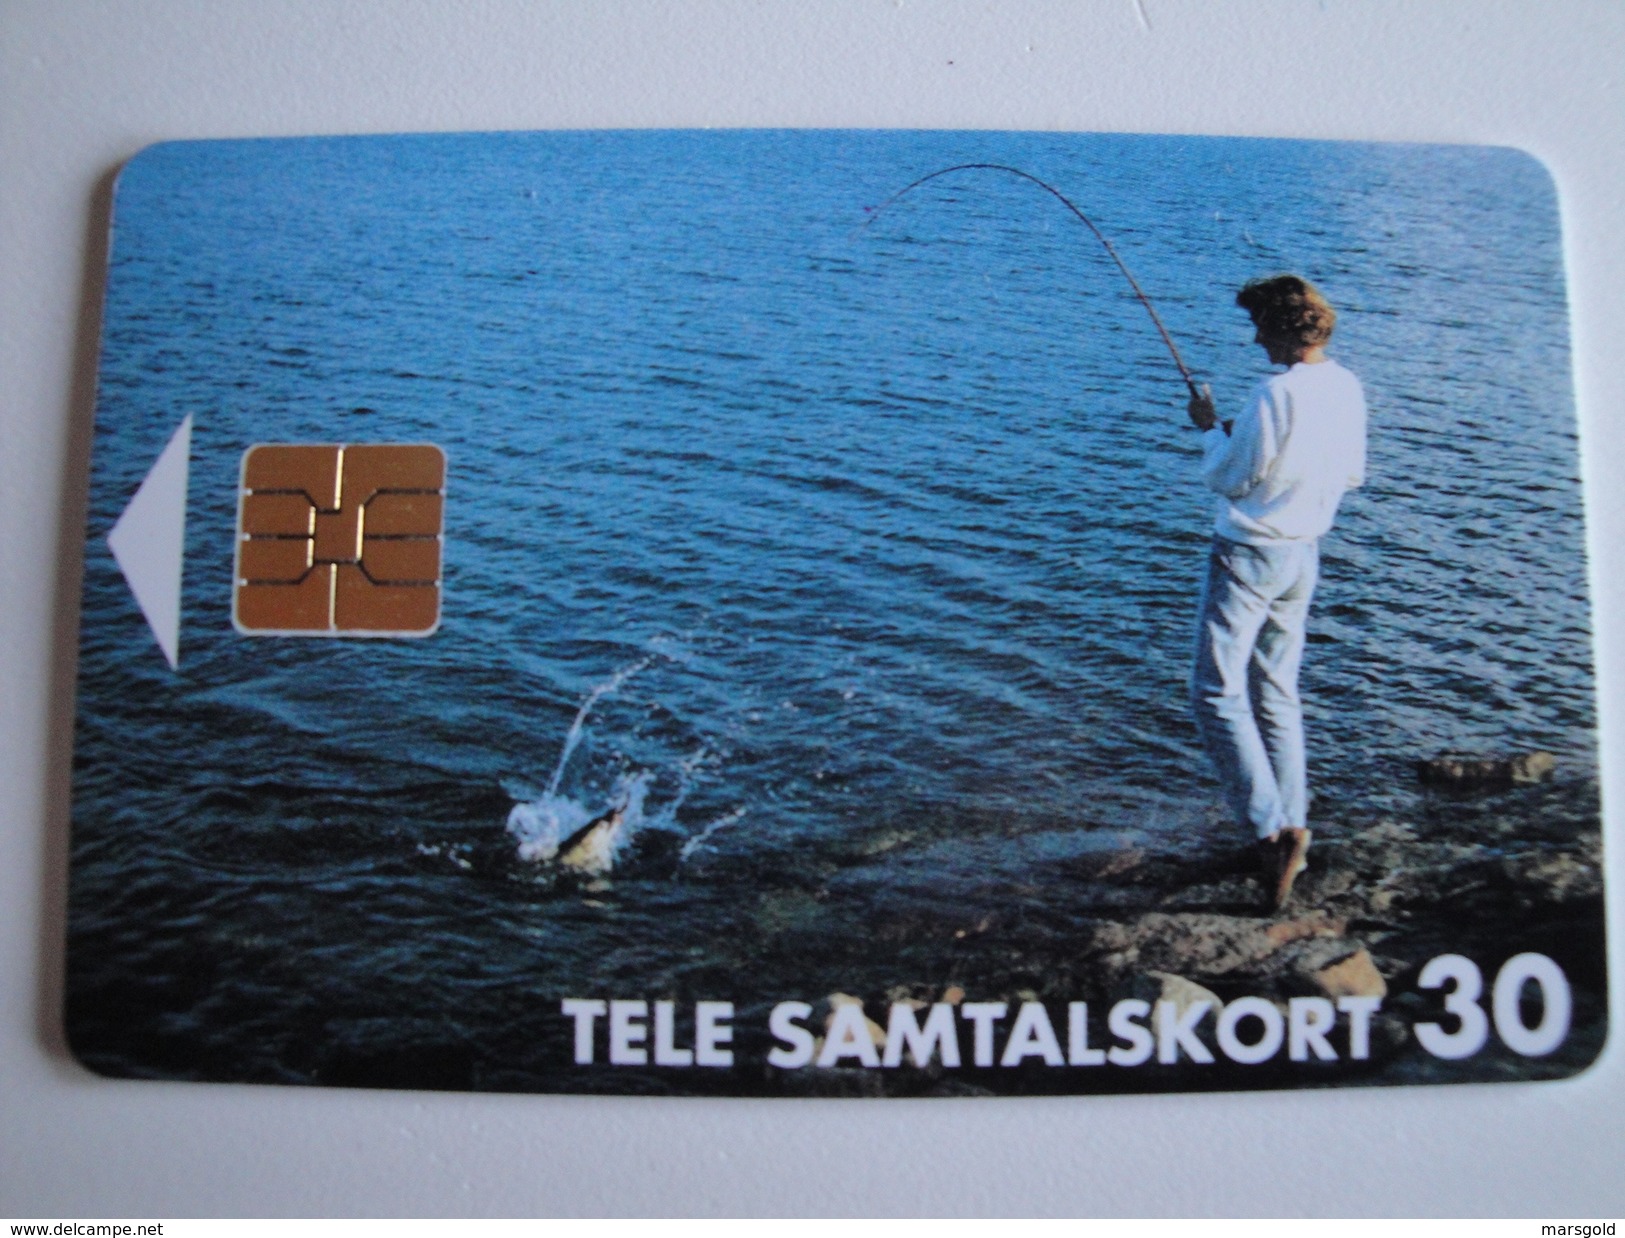 1 Chip Phonecard From Aland Island - Aland